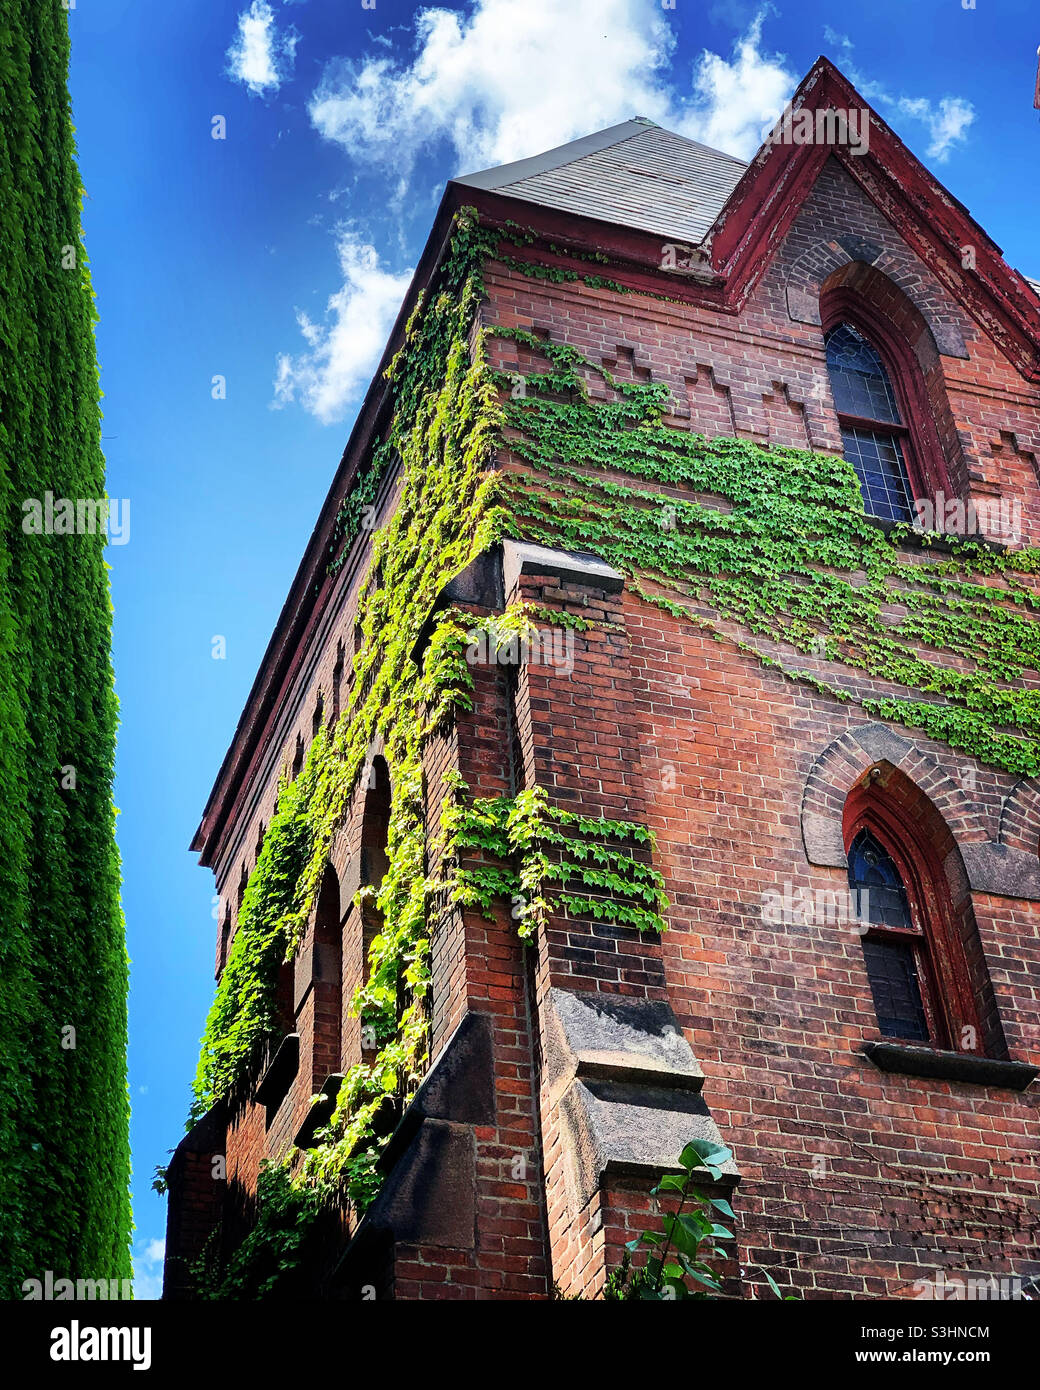 July, 2021, vines on a brick building, Brattleboro, Windham County, Vermont, United States Stock Photo